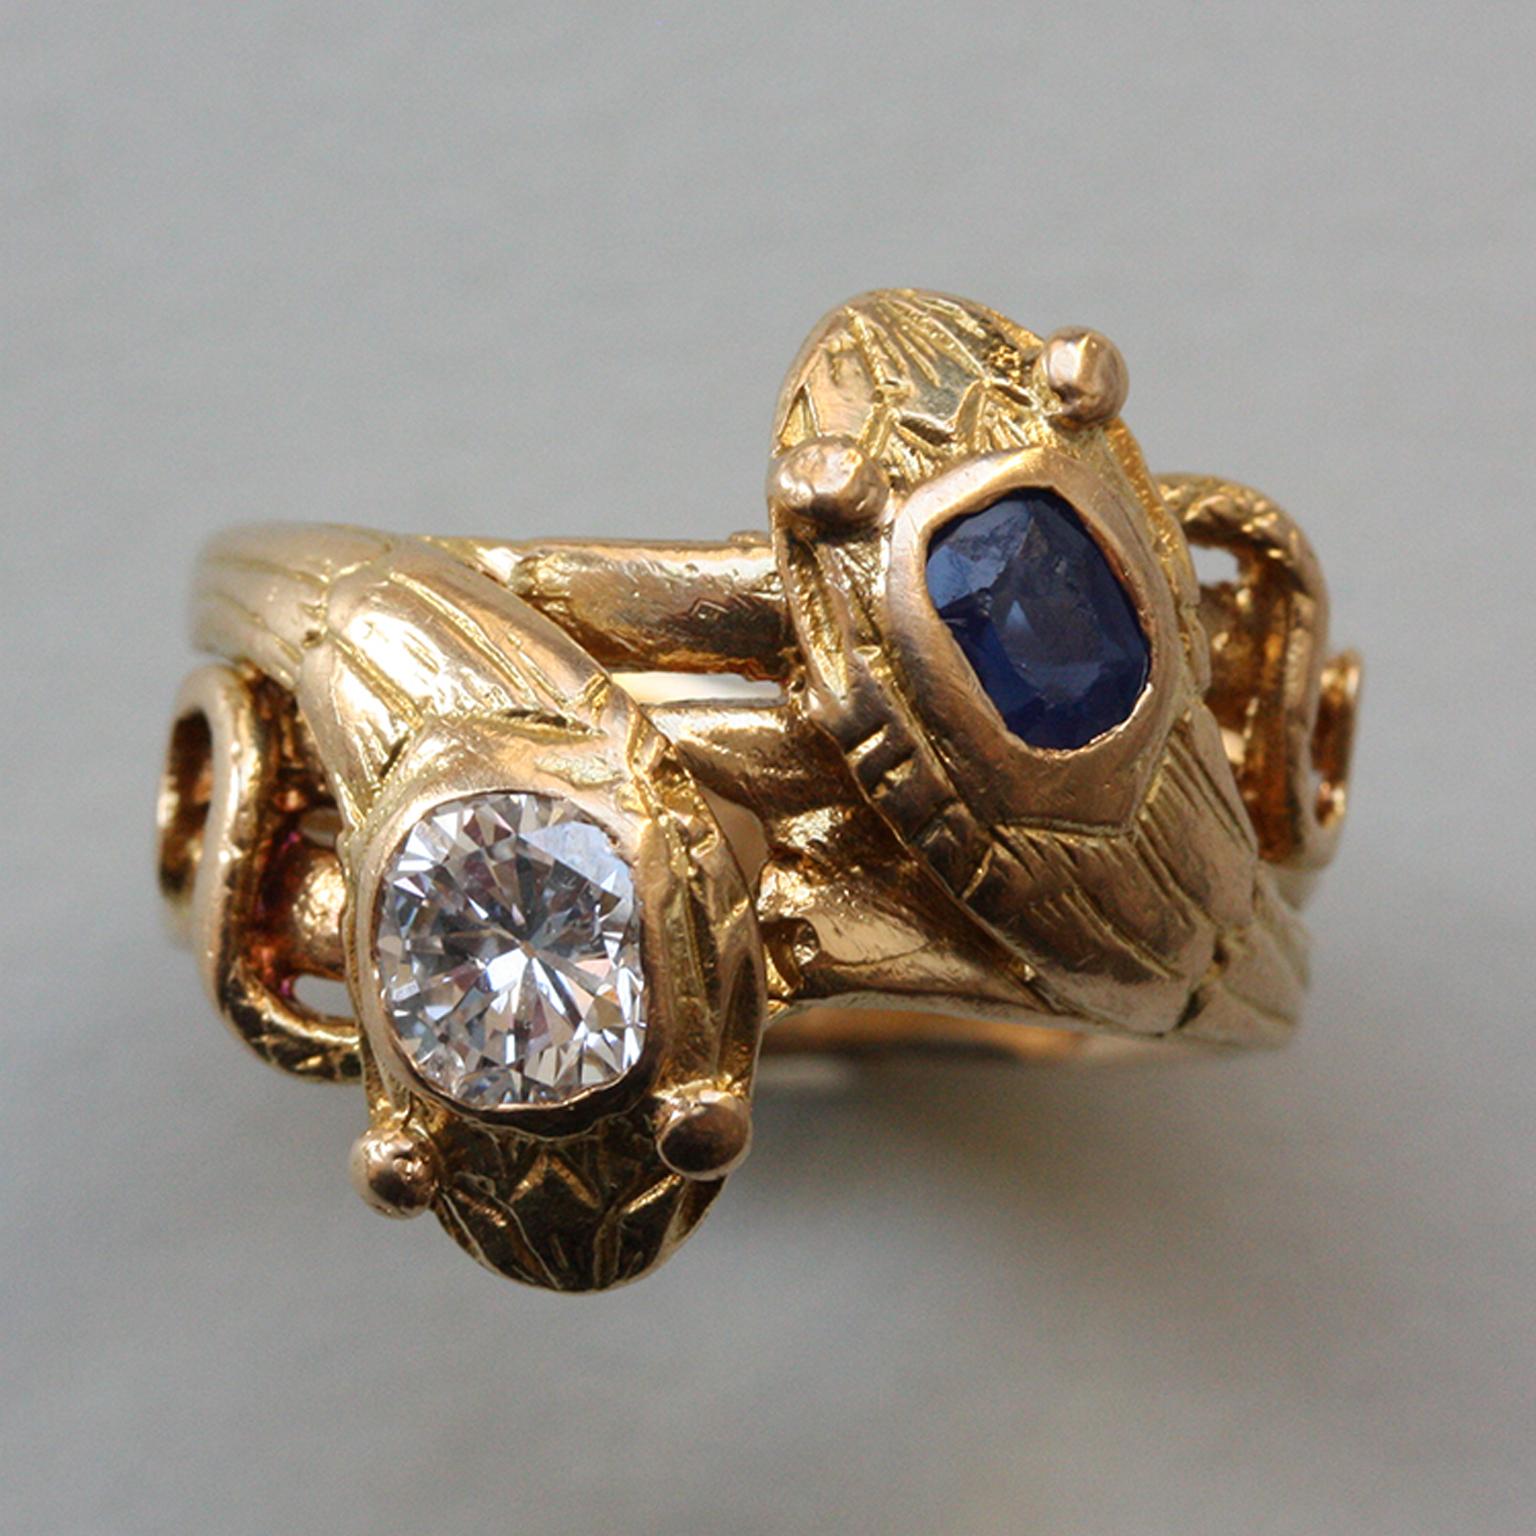 An 18 carat gold with two intertwined snakes their heads set with an old cut diamond (app. 0.45 carats) and a smaller cushion cut sapphire (app. 043 carats), master mark EA with a dolphin in between, circa 1910, France.

weight: 6.55 gram
width: 6 -